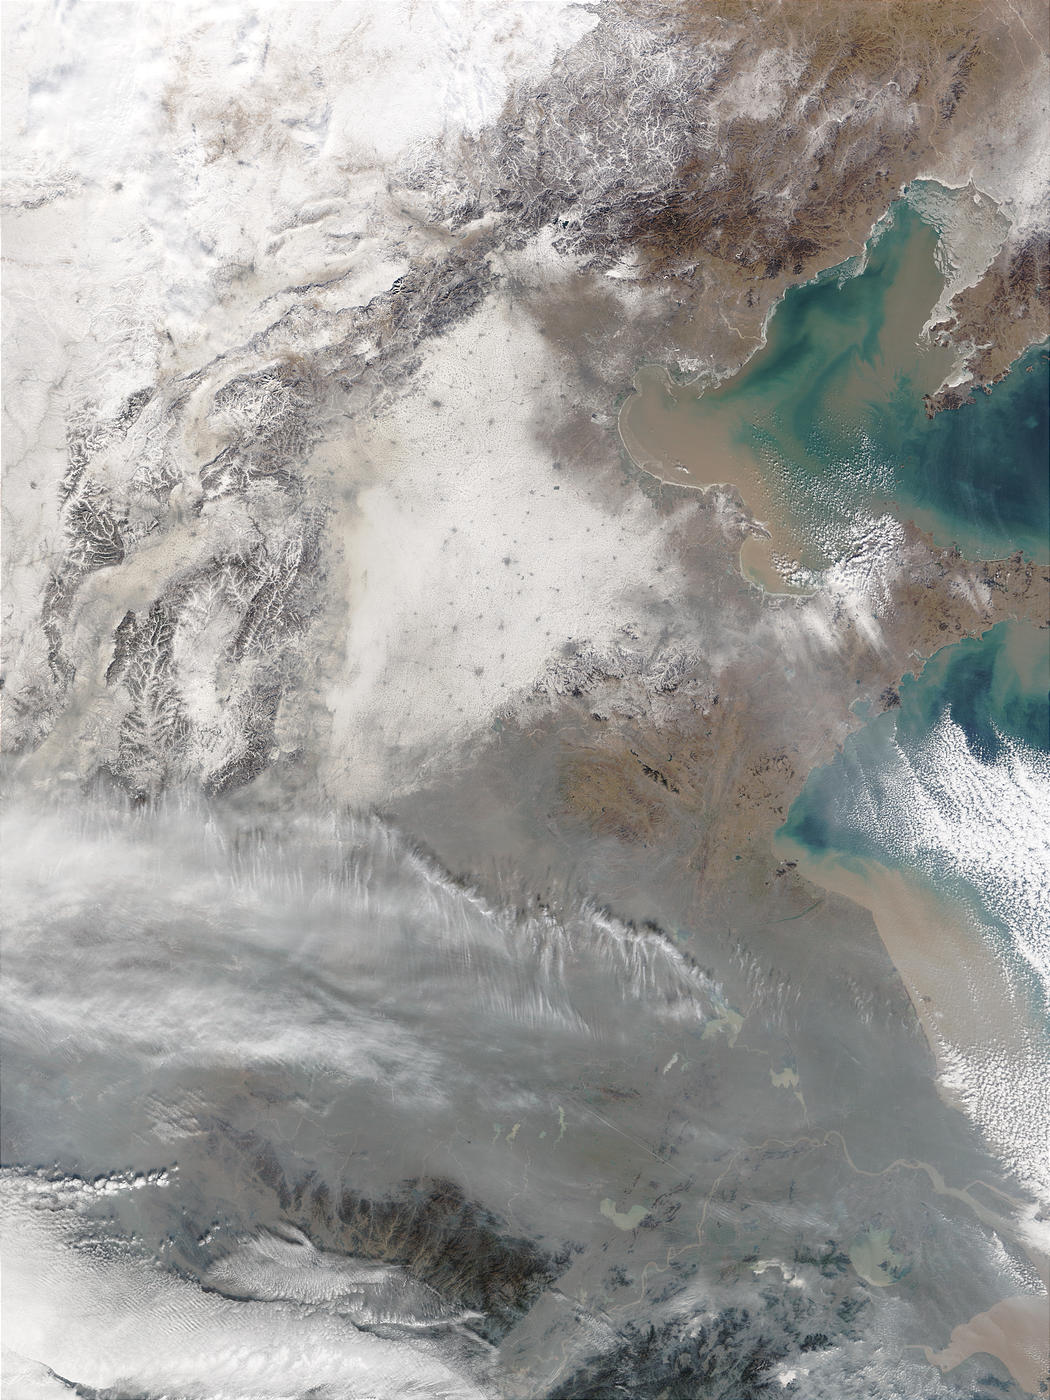 Snow and pollution in Eastern China - related image preview